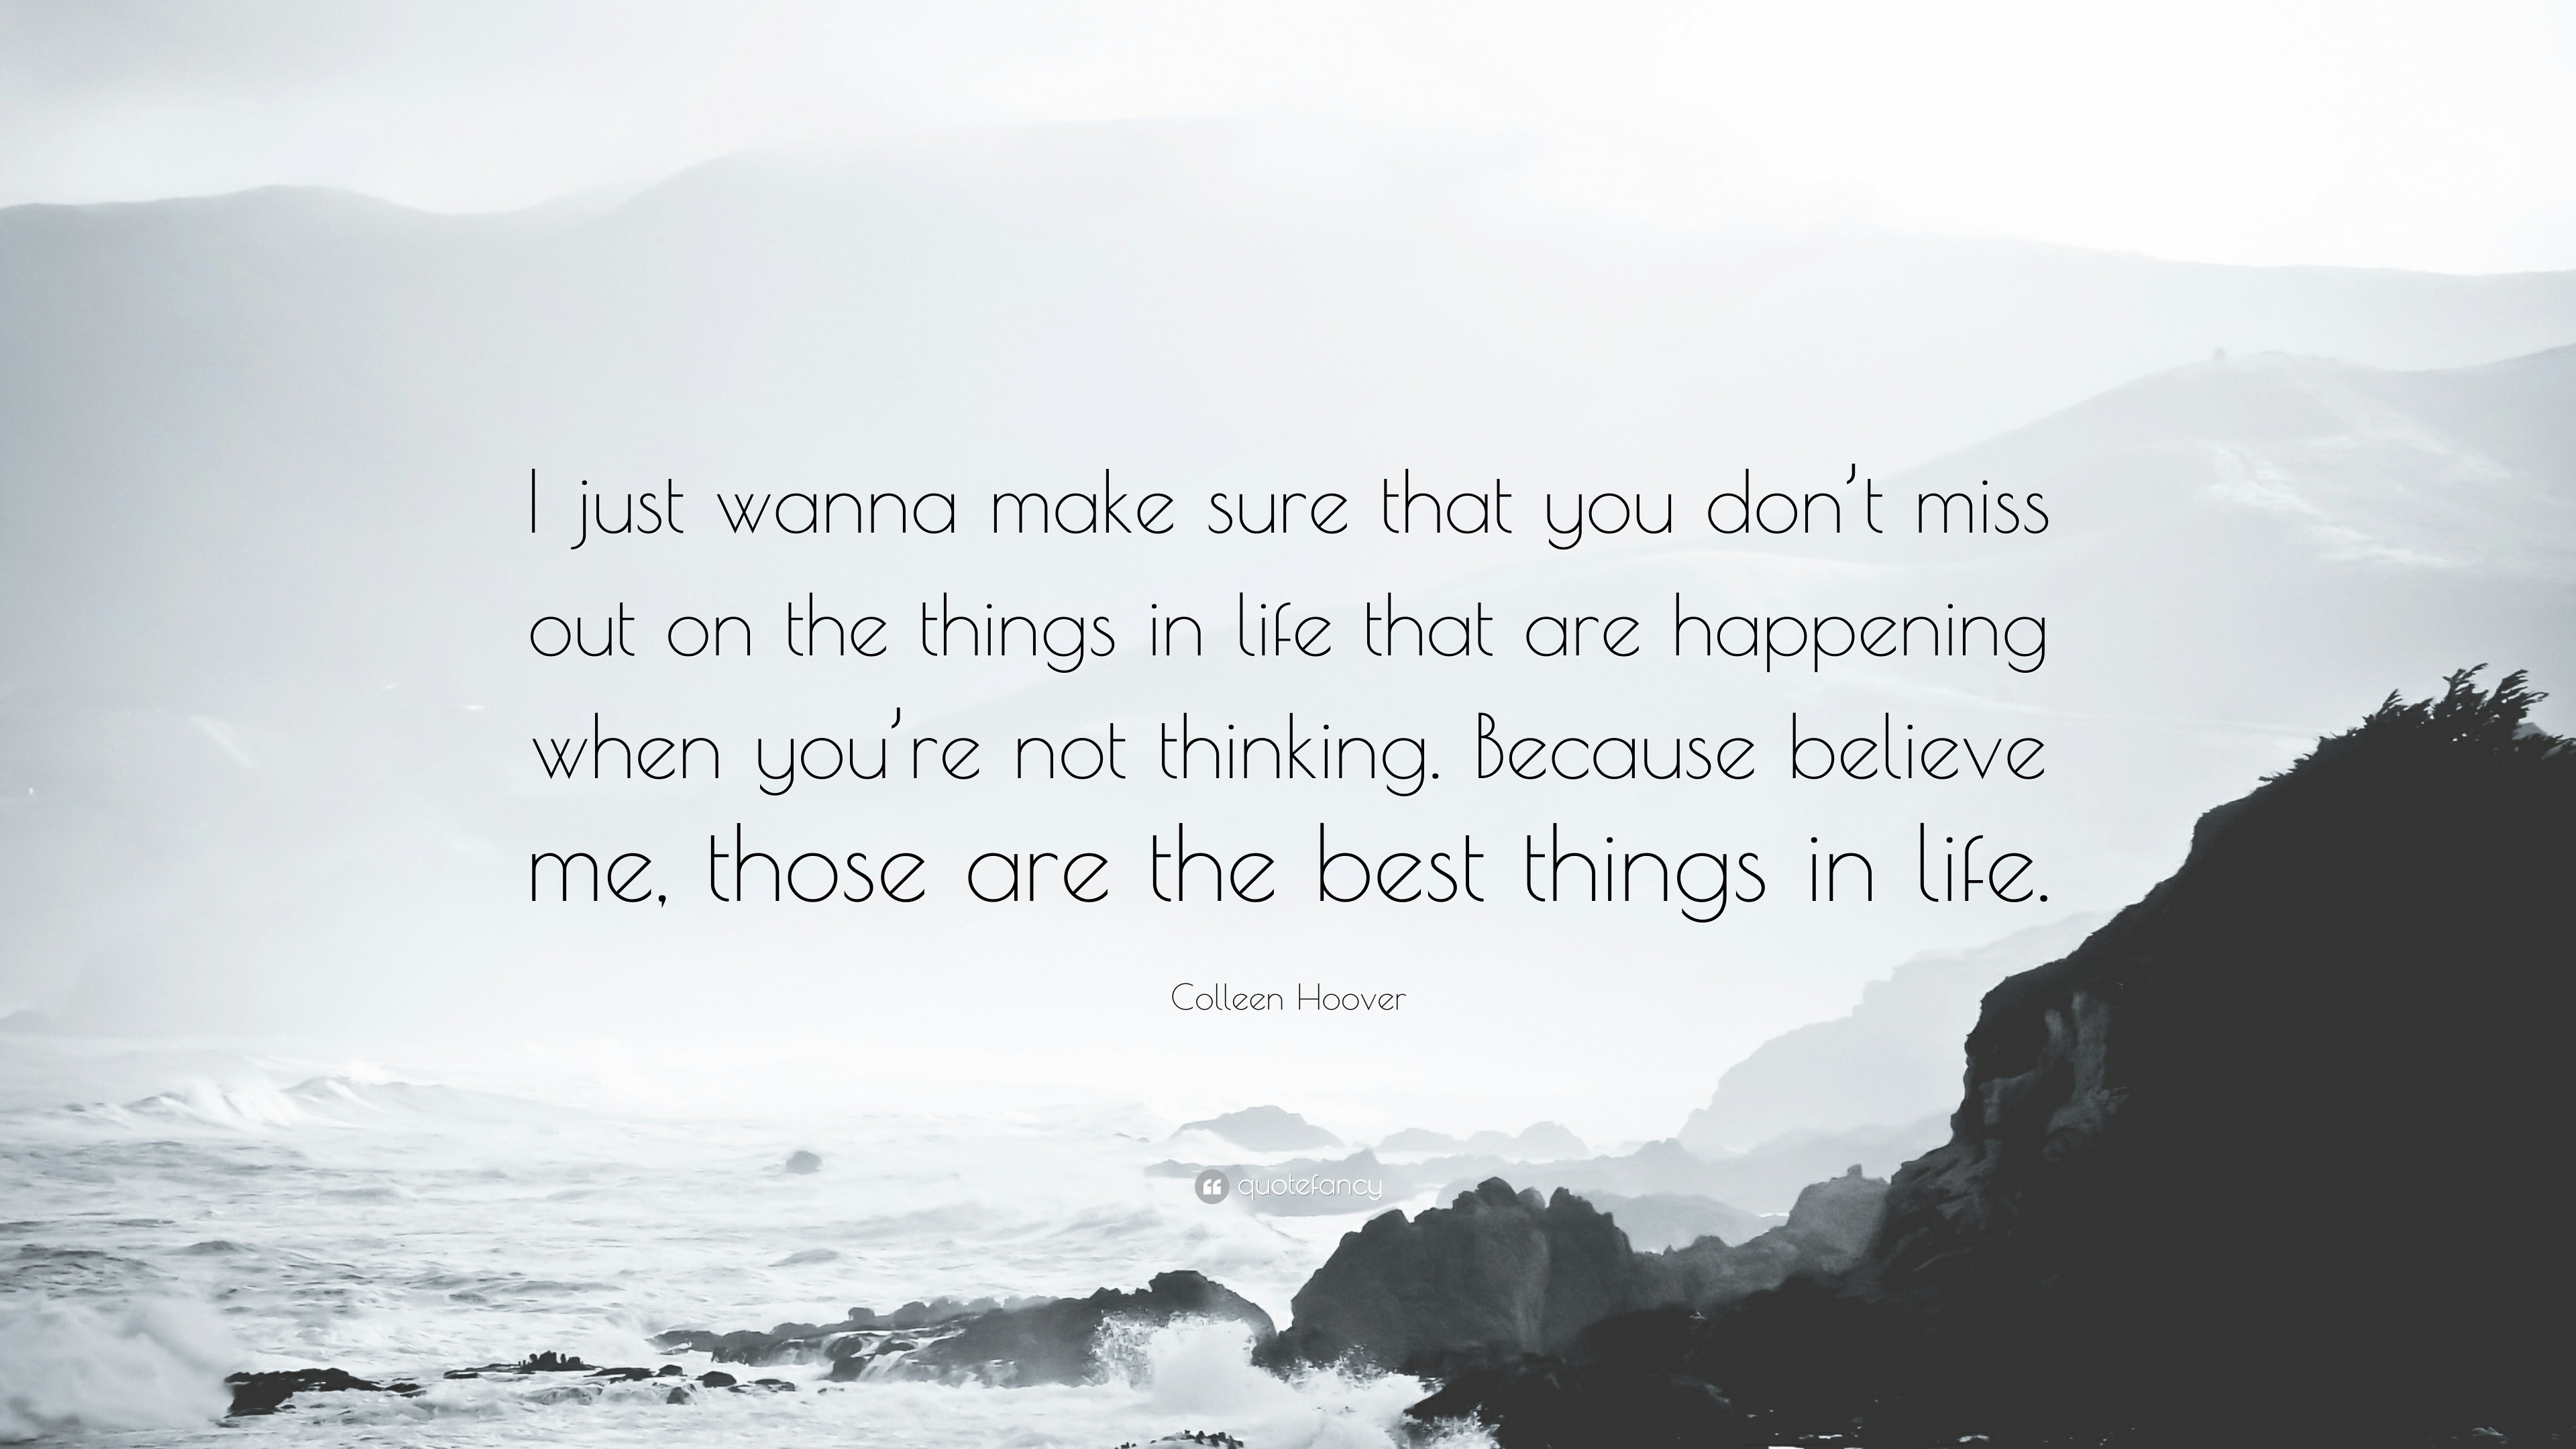 Colleen Hoover Quote I Just Wanna Make Sure That You Don T Miss Out On The Things In Life That Are Happening When You Re Not Thinking Becaus 7 Wallpapers Quotefancy